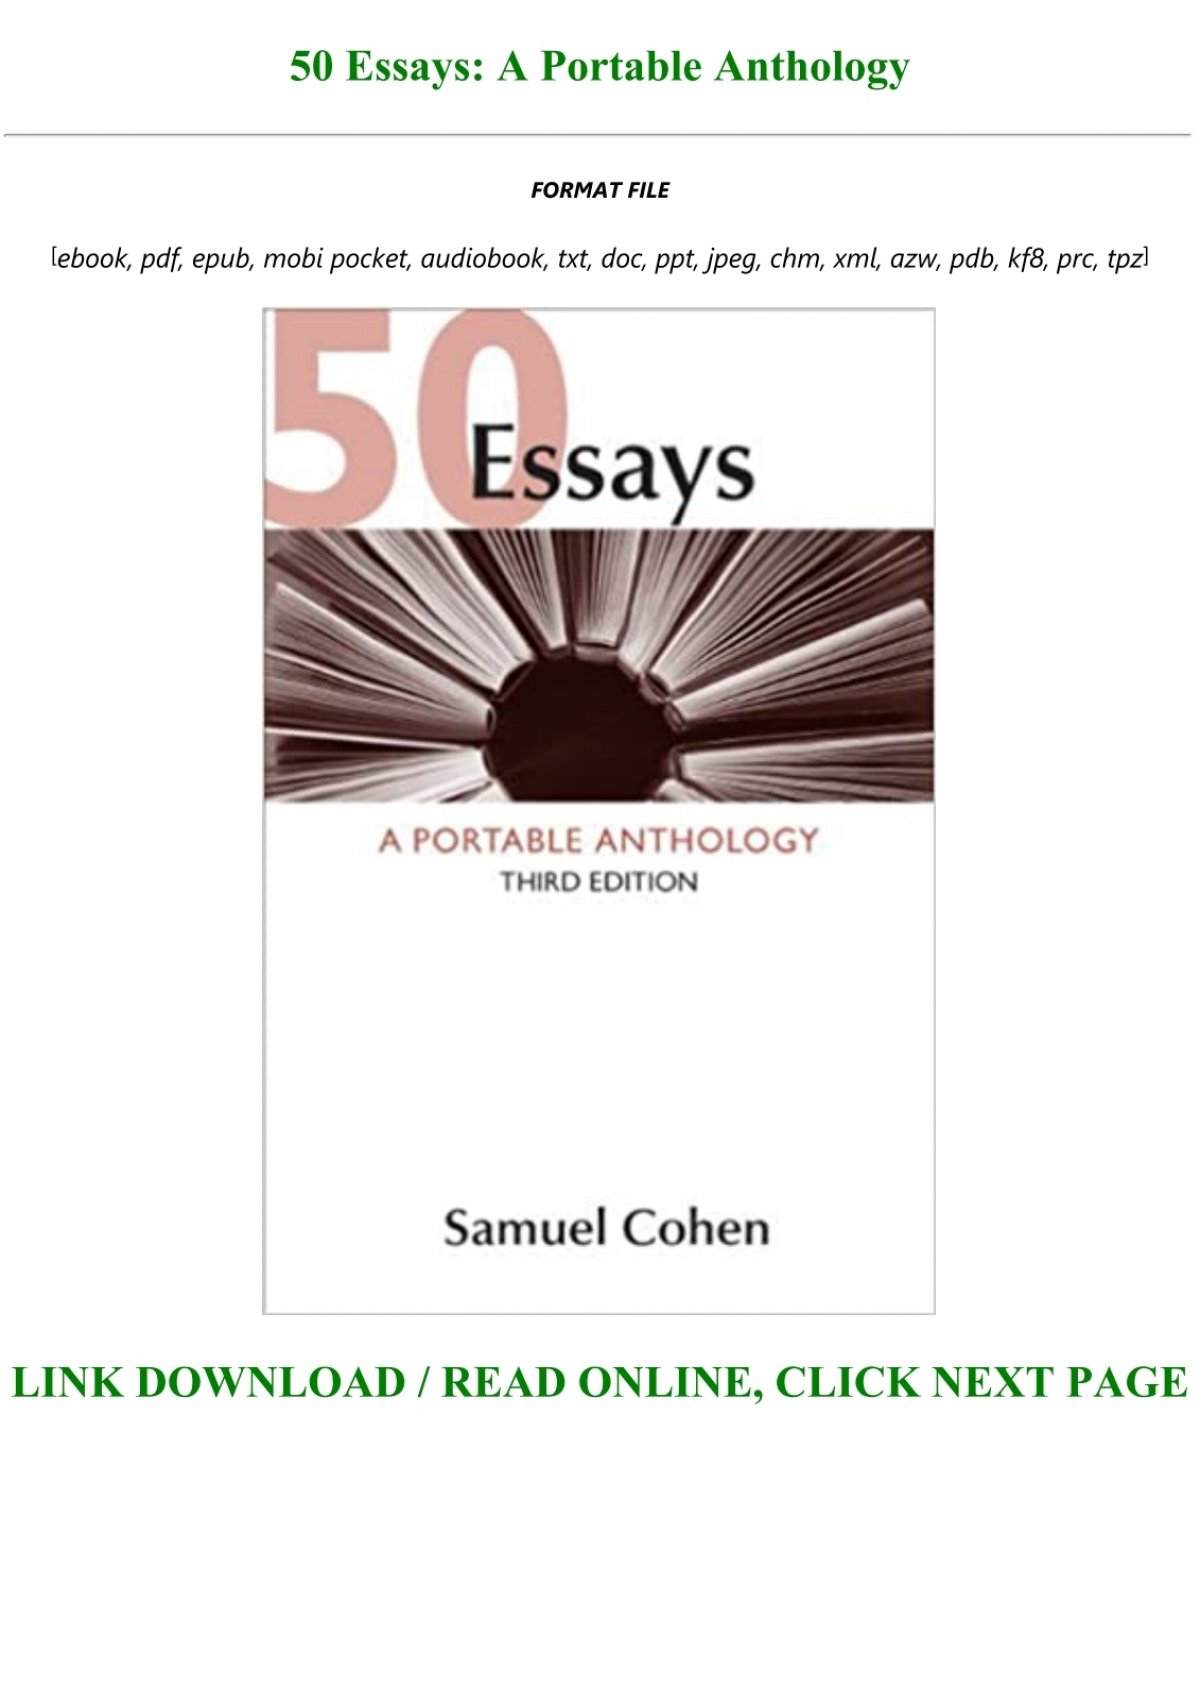 50 essays a portable anthology fifth edition